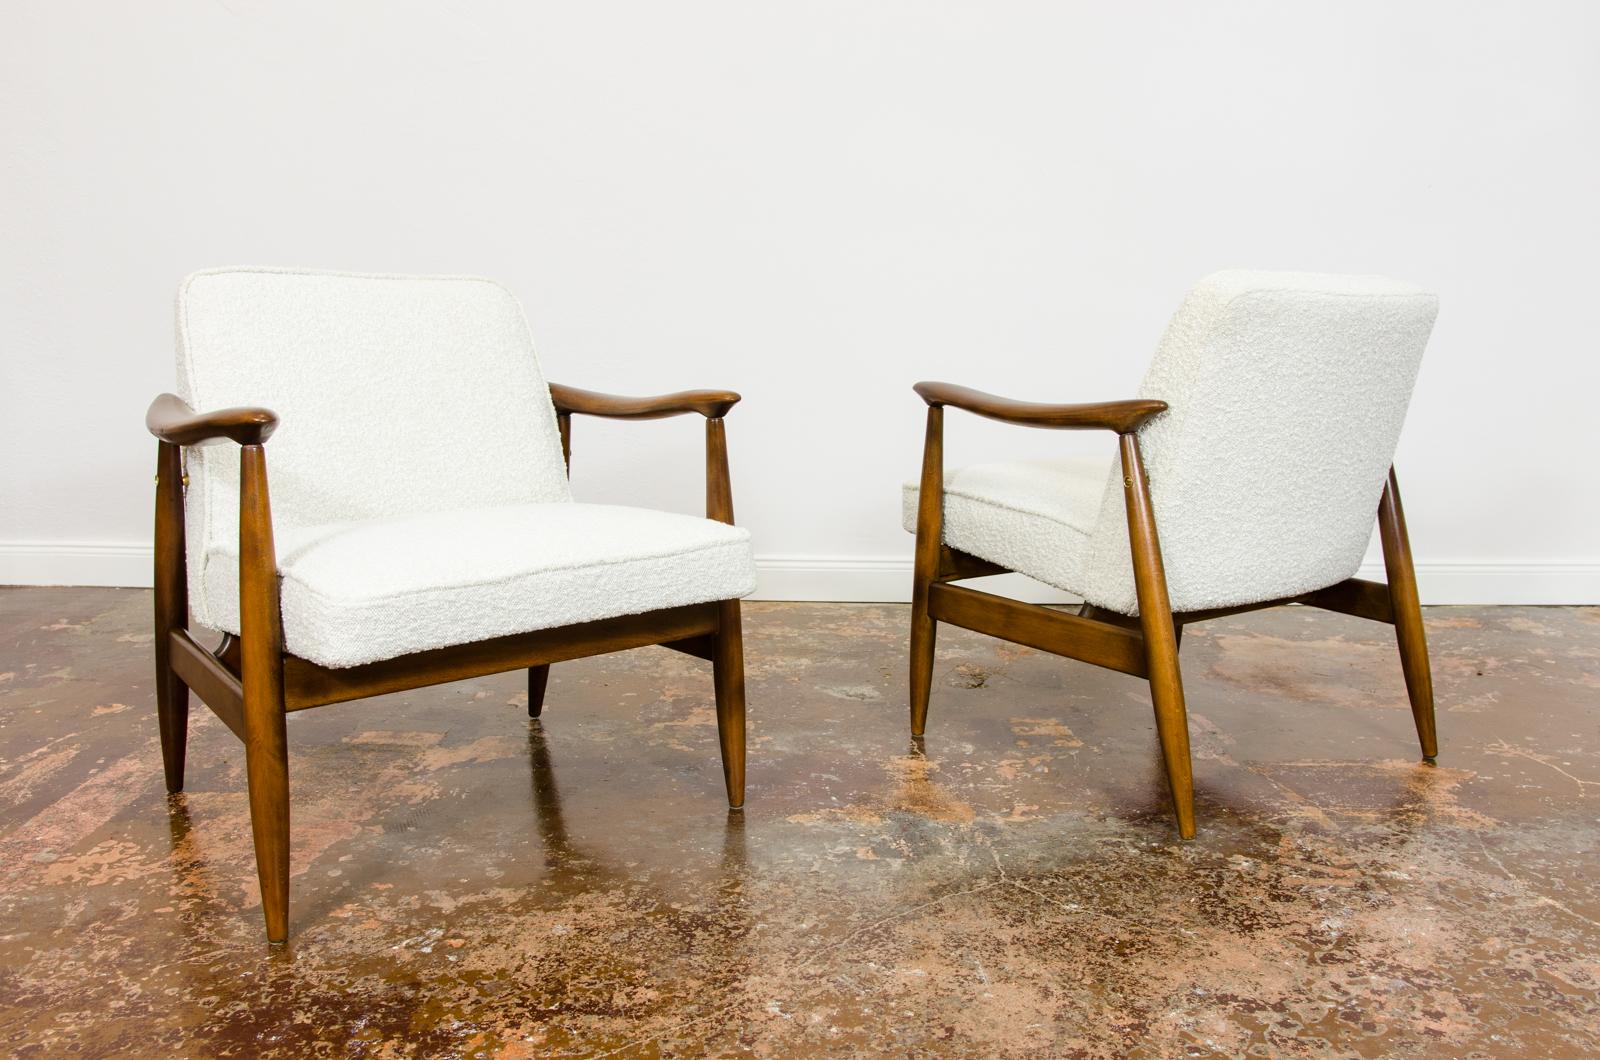 Customizable Pair Of  Mid Century Armchairs GFM87 By Juliusz Kędziorek, Gościcińskie Fabryki Mebli 1960s, Poland.
Reupholstered in white bucle type of fabric. 
Solid beech wood has been restored and refinished.
We offer fabric customization upon